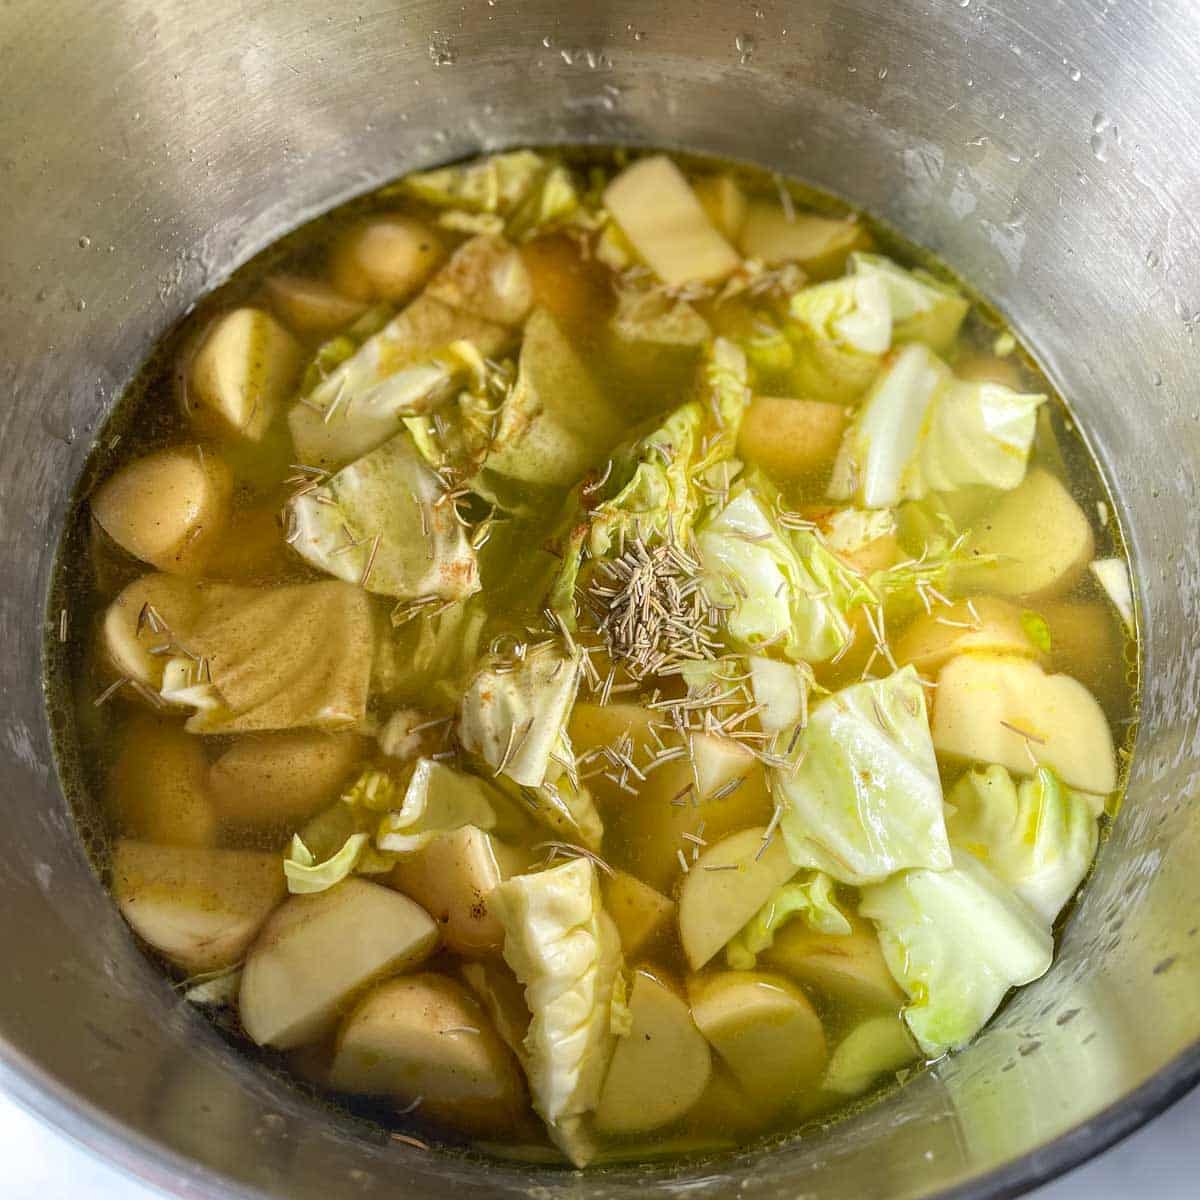 The broth and spices are added to the pot.